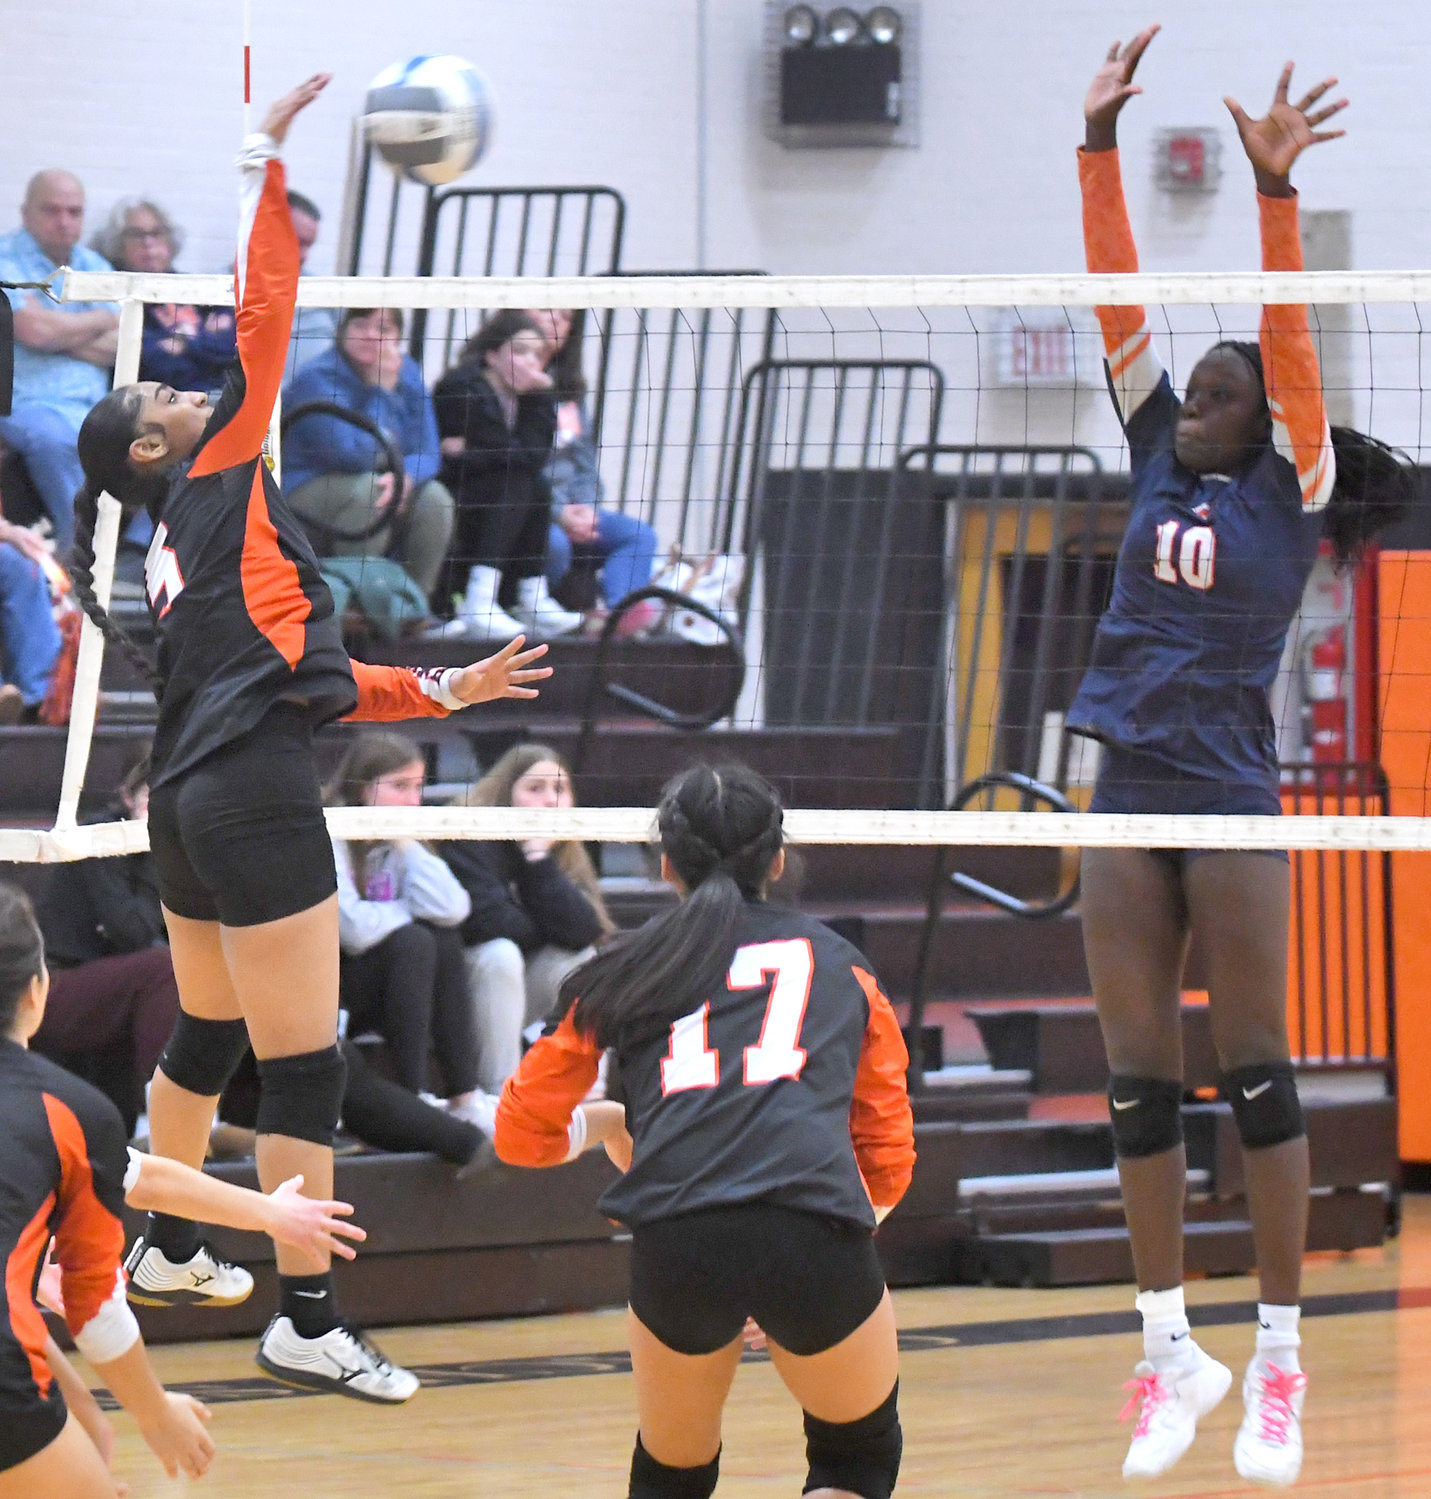 Kassity Cruz of Rome Free Academy, left, makes a kill in front of East Syracuse Minoa’s Akuot Kuany Friday night at Strough Middle School in Rome in a Class A quarterfinal match. Cruz had nine kills and 11 digs in a four-set win.